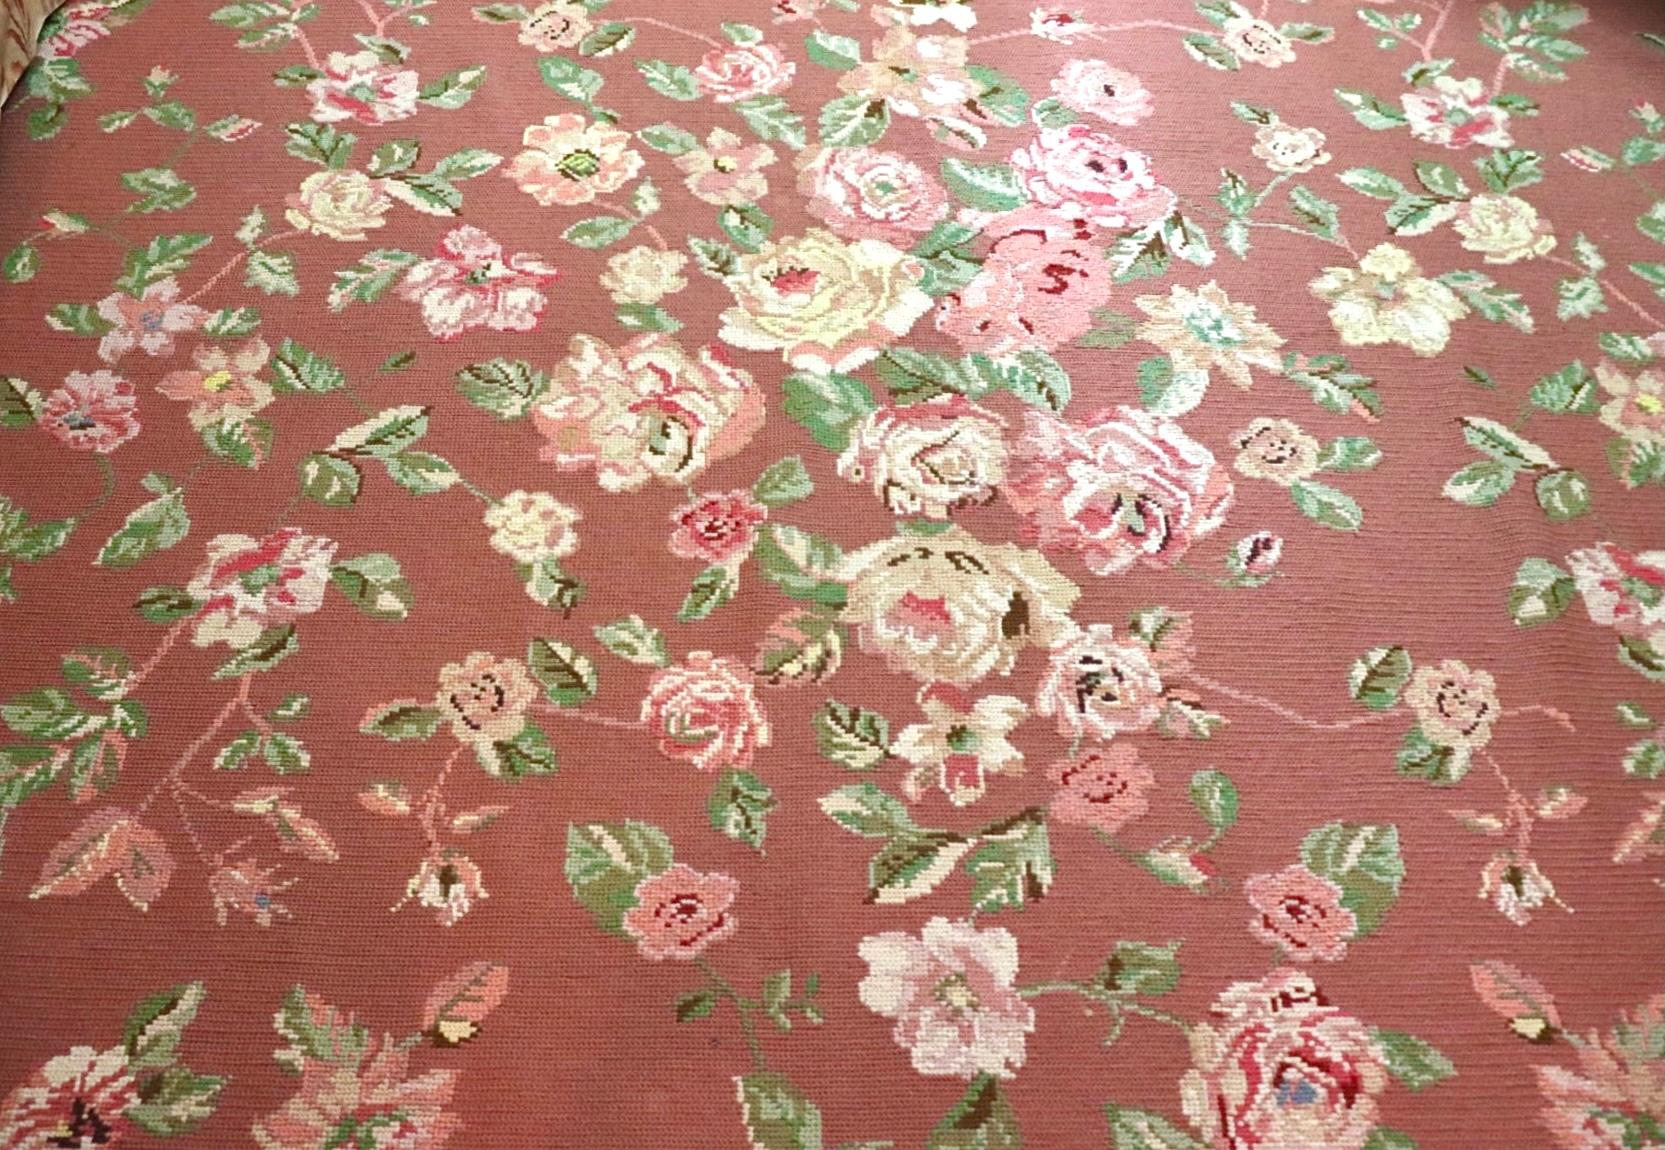 Vintage fine Portuguese needlepoint rose carpet Schumacher, PFM rug, handmade. 

Vintage fine Portuguese Gros Point carpet - the dusty rose field with an abundance of rose clusters on vines within a self-colored confirming border, woven in shades of